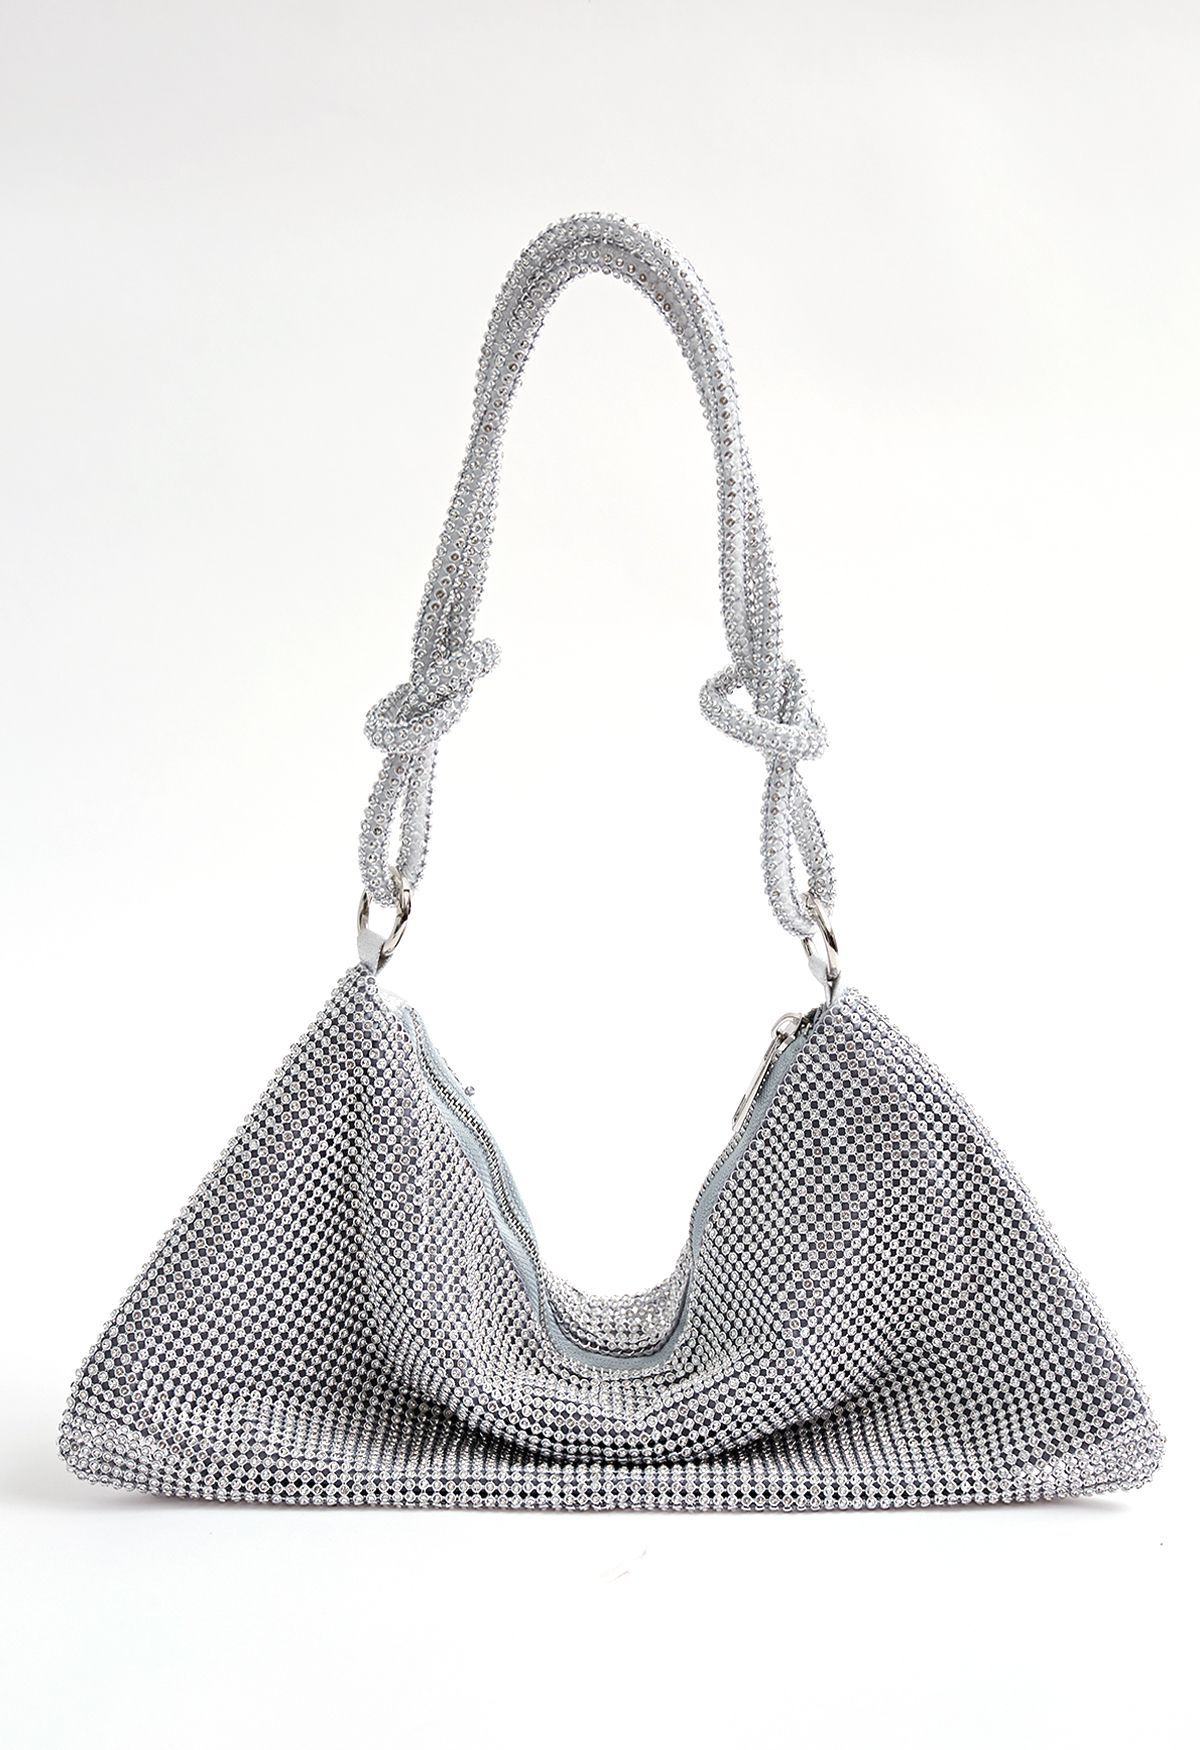 Full Diamond Double String Shoulder Bag in Silver | Chicwish